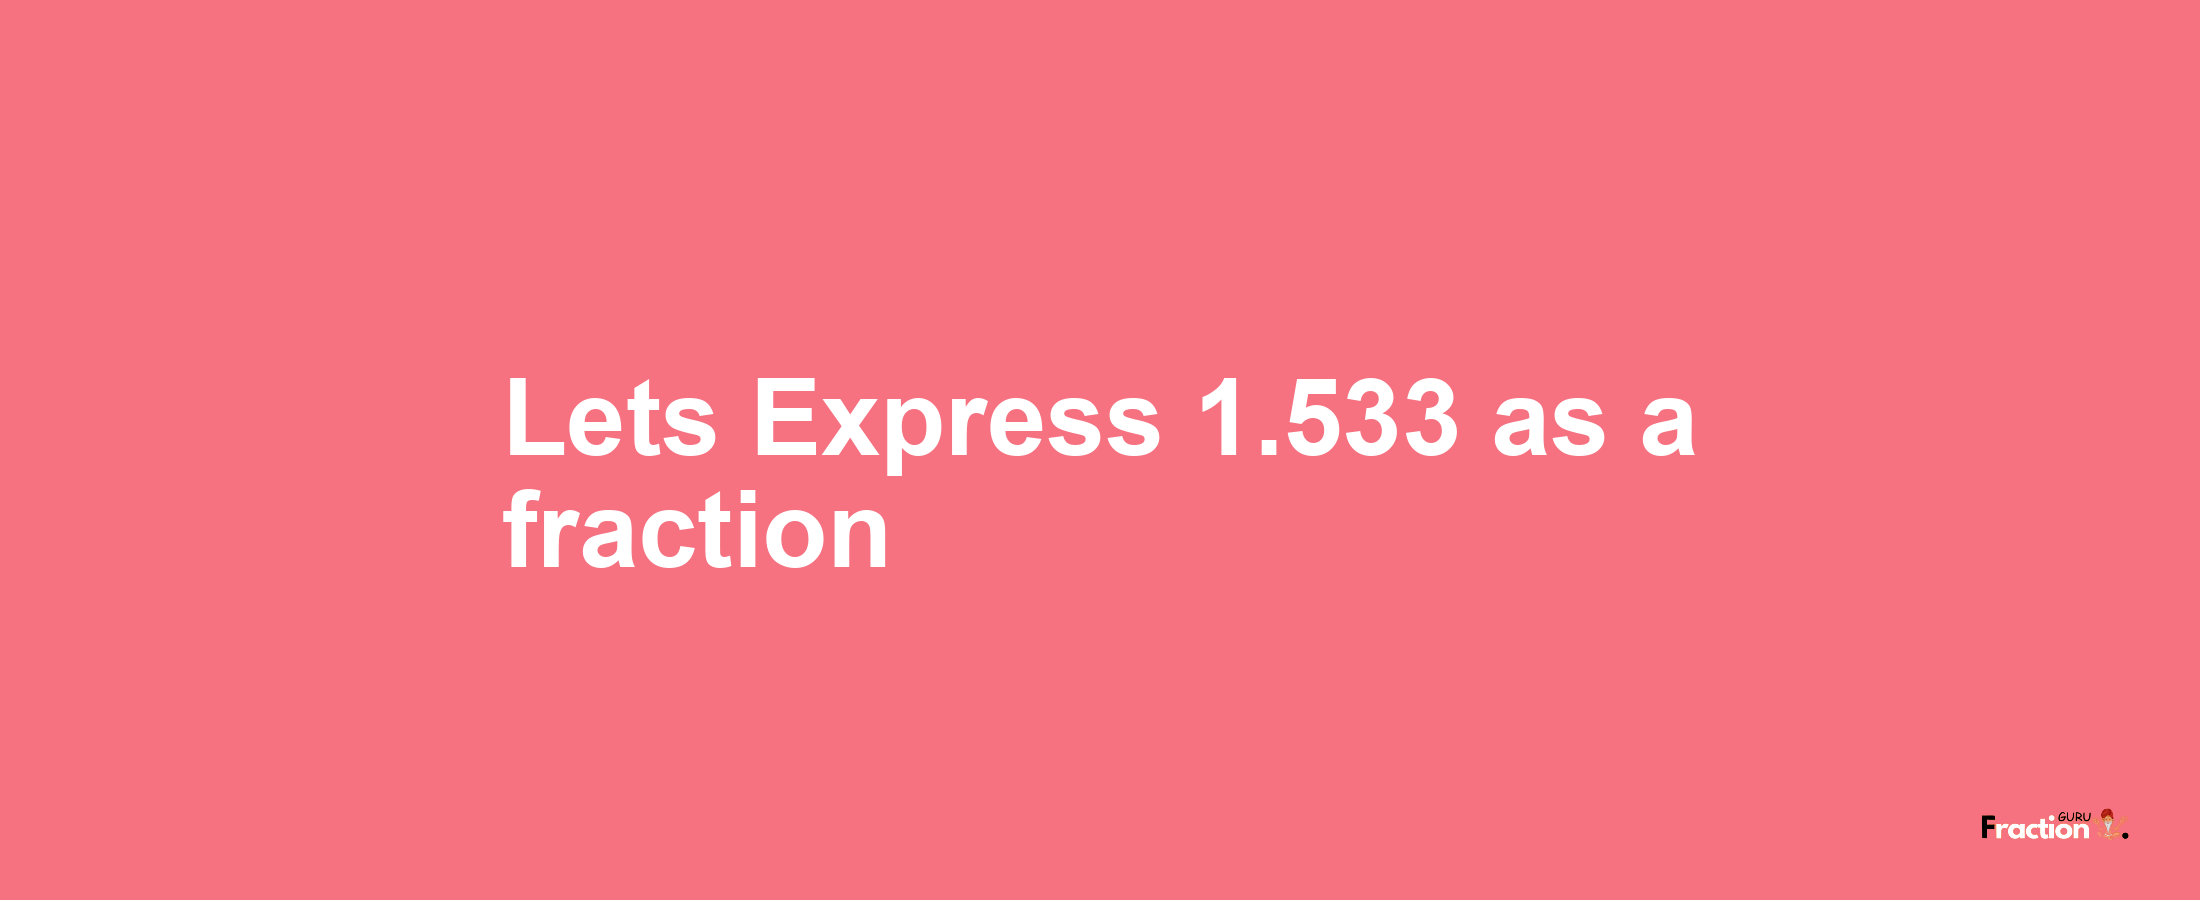 Lets Express 1.533 as afraction